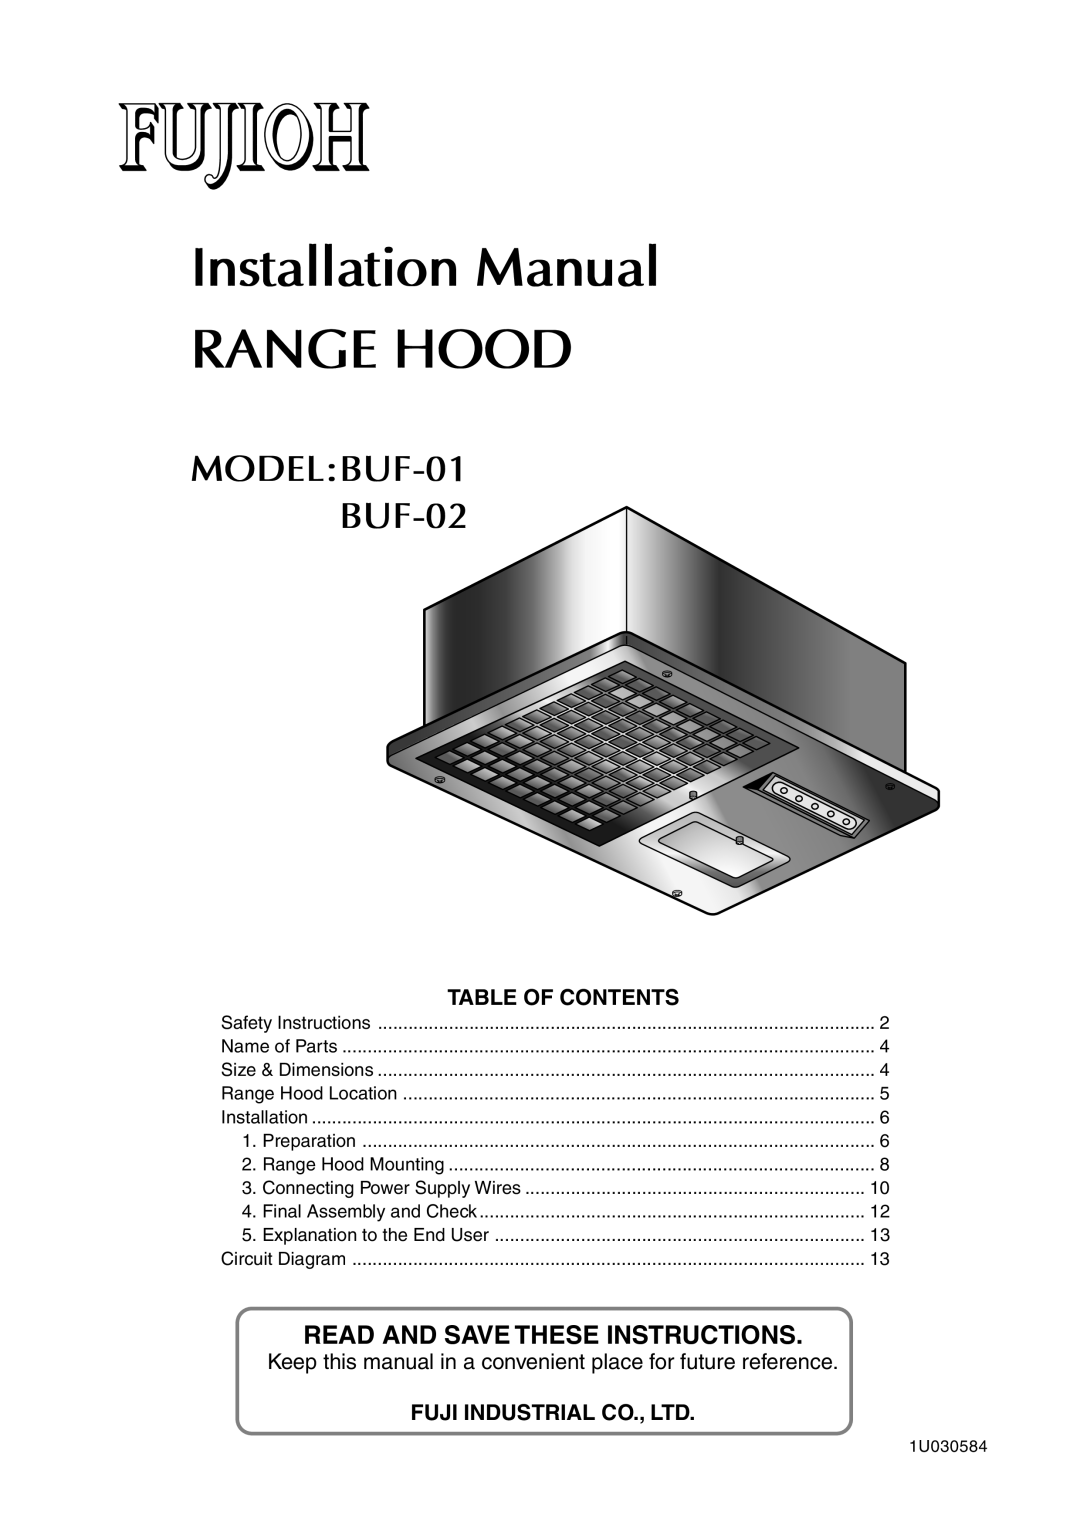 Fujioh BUF-01 installation manual Read And Save These Instructions, Table Of Contents, Installation Manual RANGE HOOD 